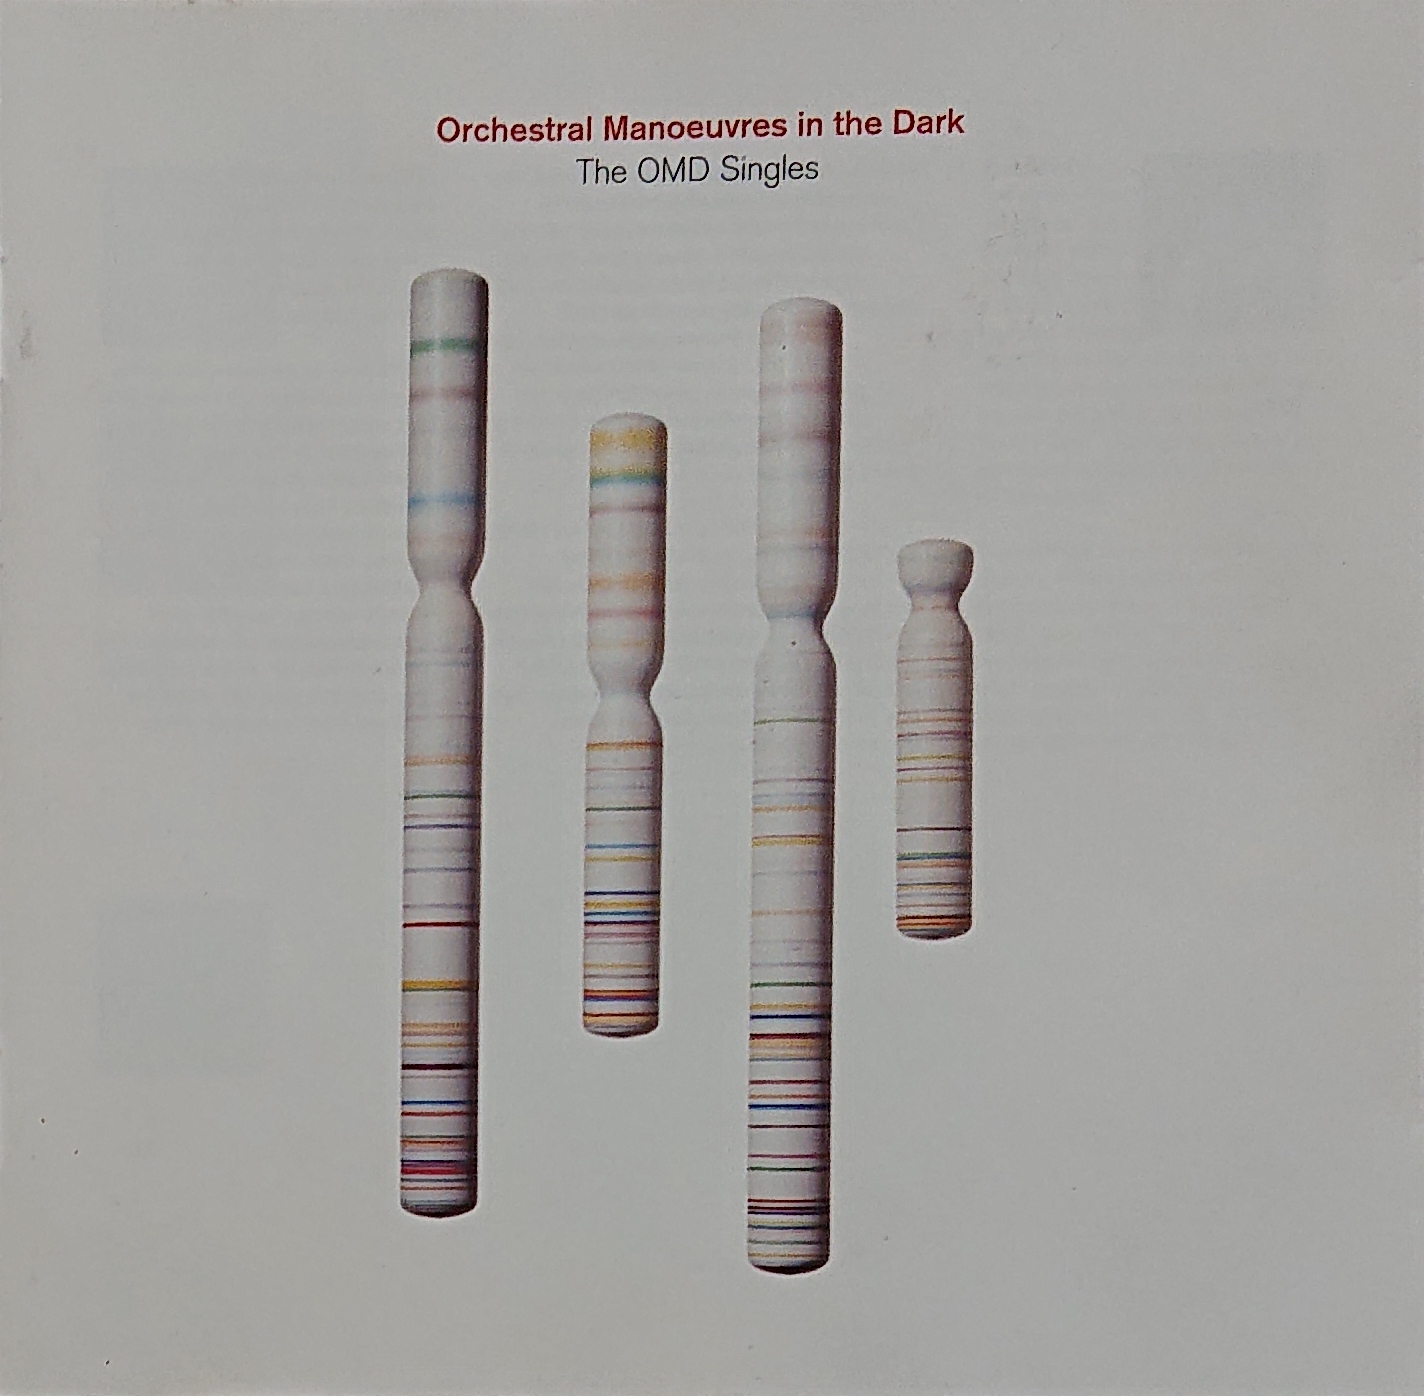 Picture of The OMD singles by artist Orchestral Manoeuvres in the Dark 